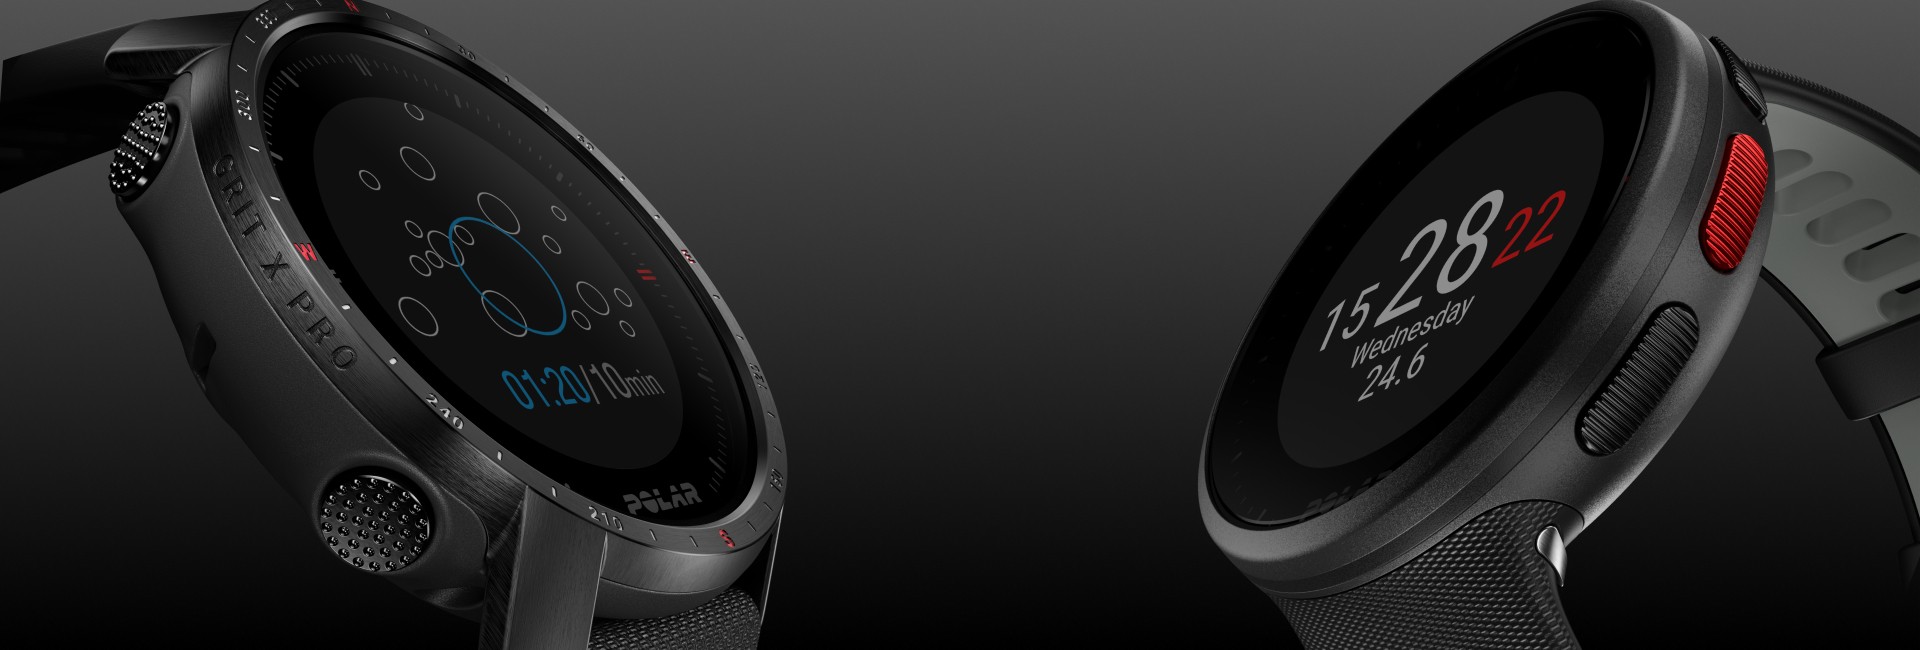 Polar Grit X Pro vs. Polar Vantage V2: Which Is The Best Premium Sports Watch For Me?